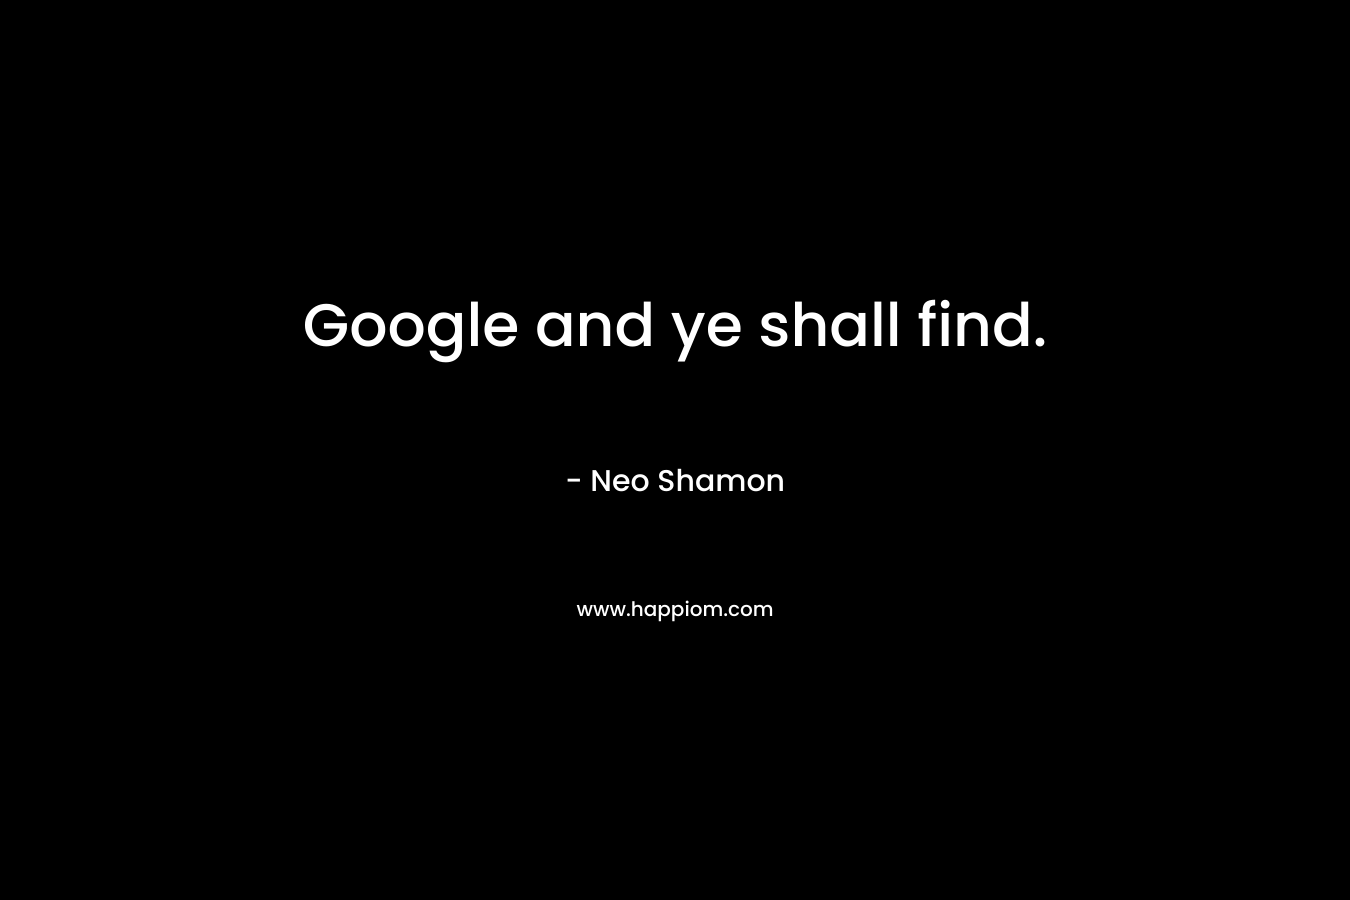 Google and ye shall find.